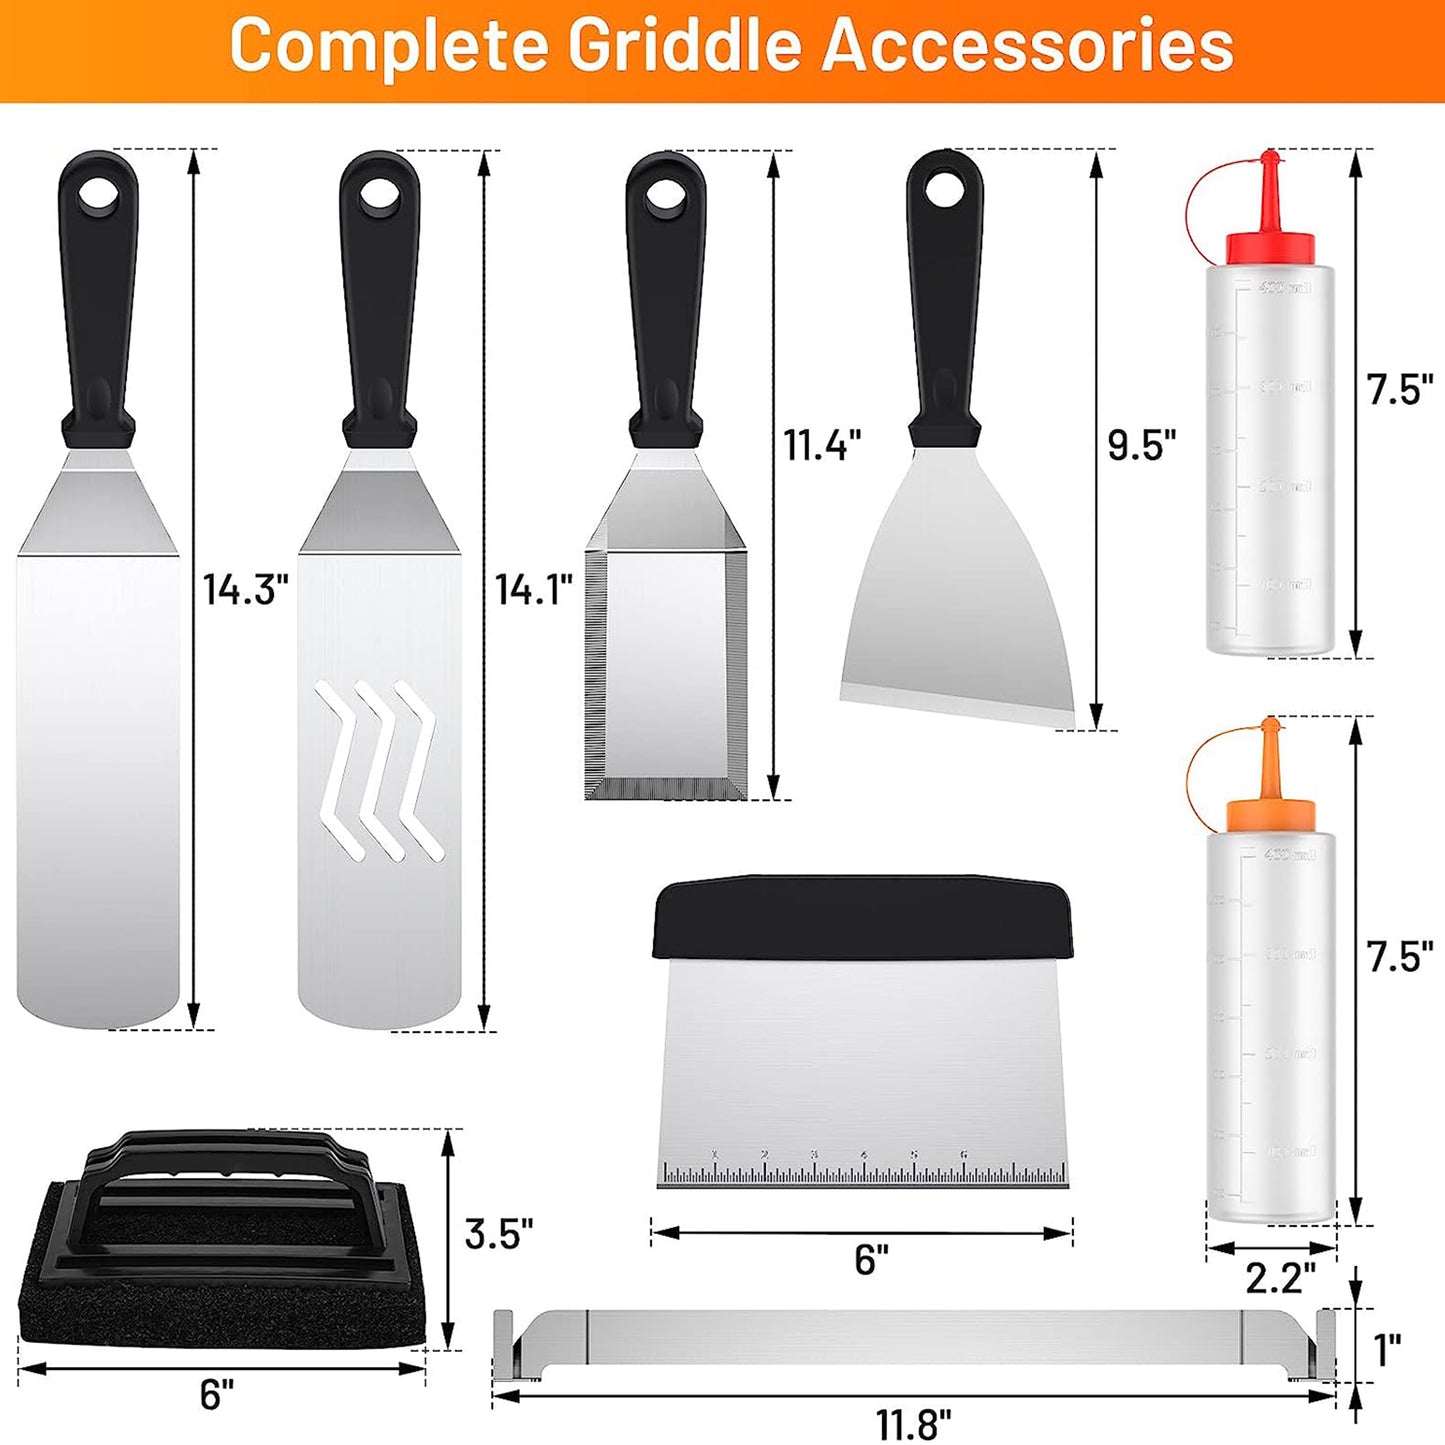 Blackstone Griddle Accessories, 10 Pcs Flat Top BBQ Grill Tool Set Extra-Thick Stainless Steel Grill Accessories for Camping Backyard Barbecue